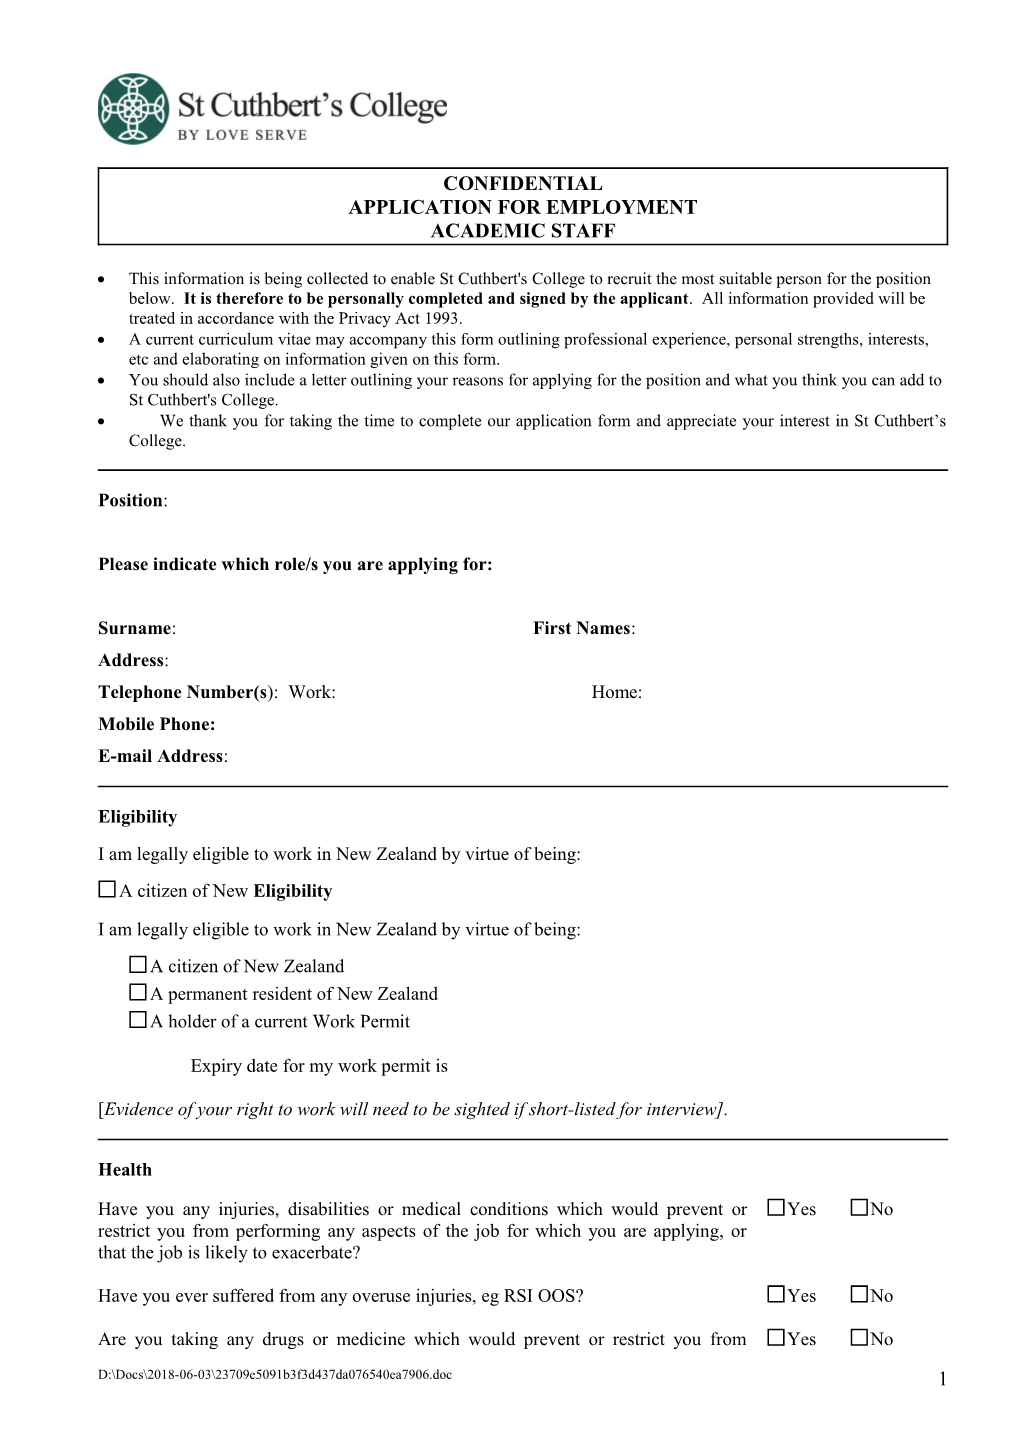 Cuthberts Application Form